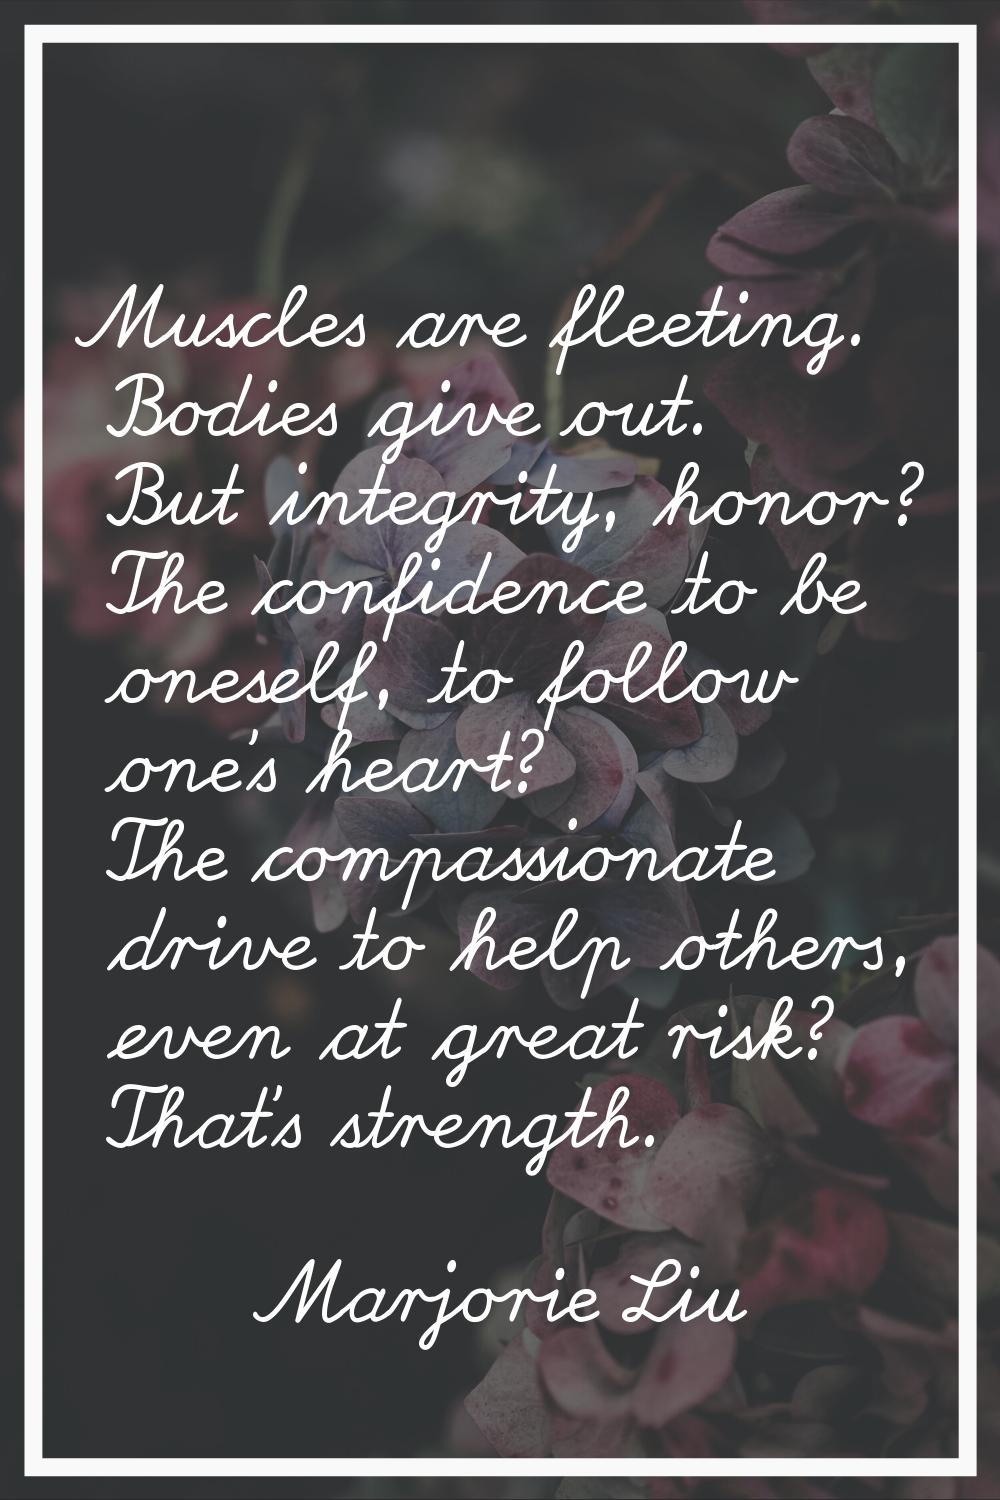 Muscles are fleeting. Bodies give out. But integrity, honor? The confidence to be oneself, to follo